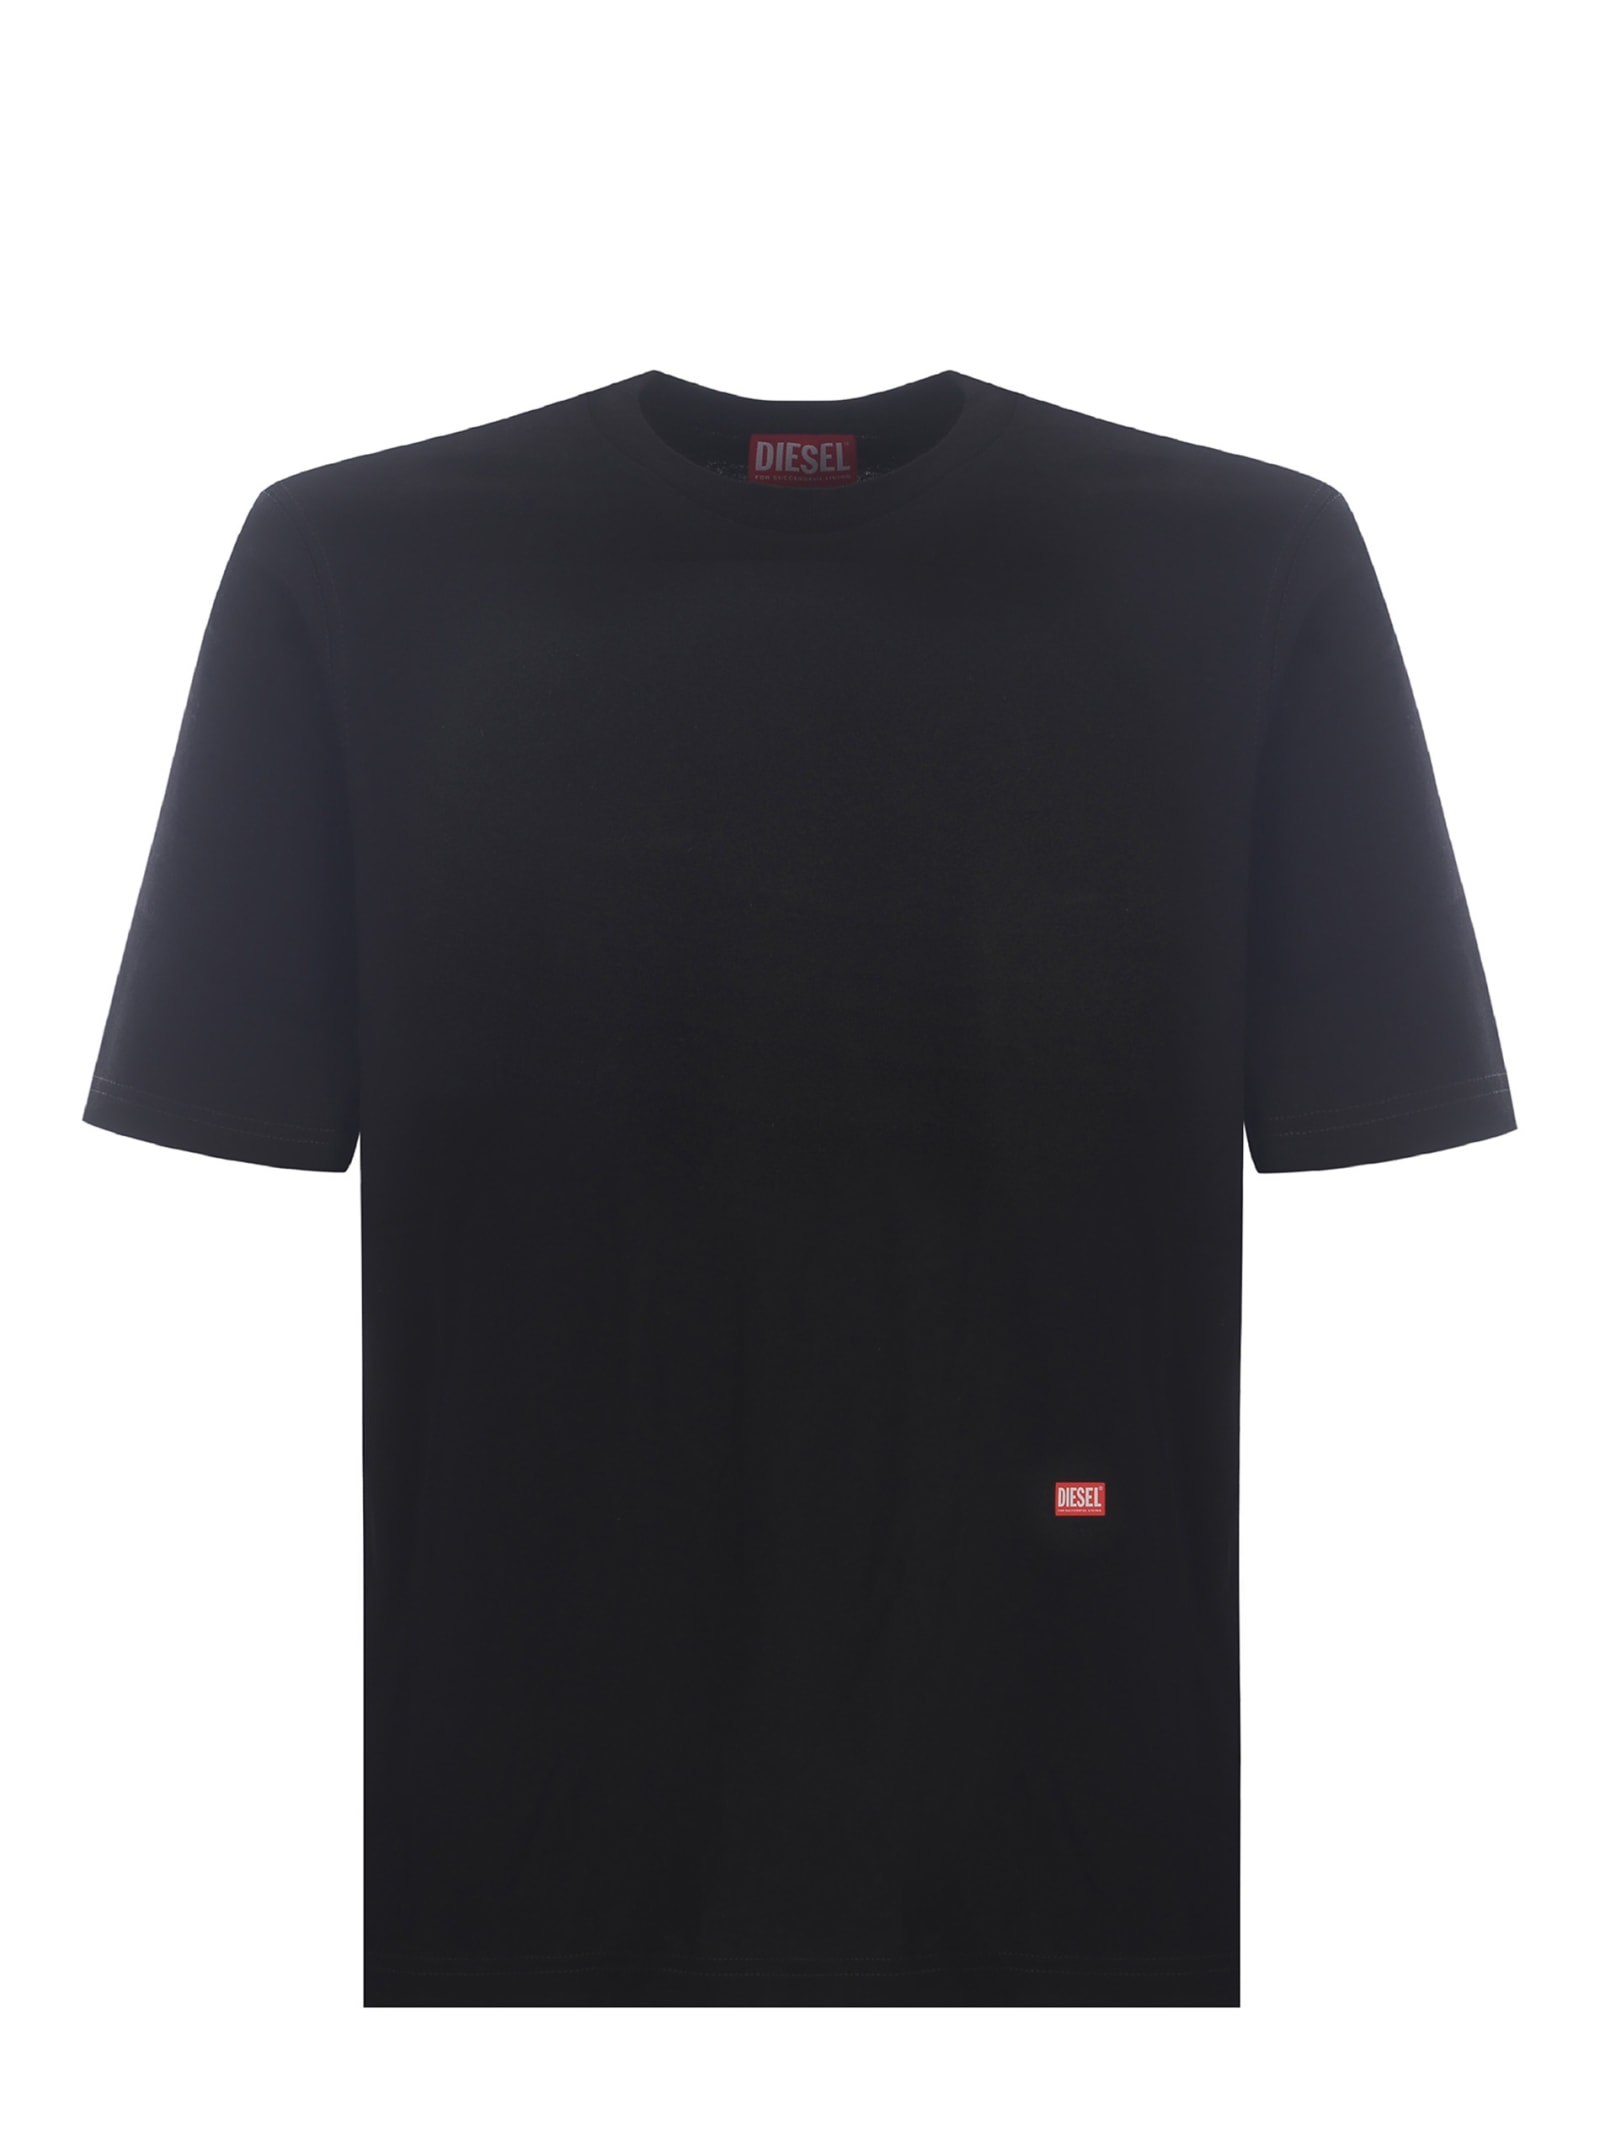 DIESEL T-SHIRT DIESEL T-BOXT-N11 MADE OF COTTON JERSEY